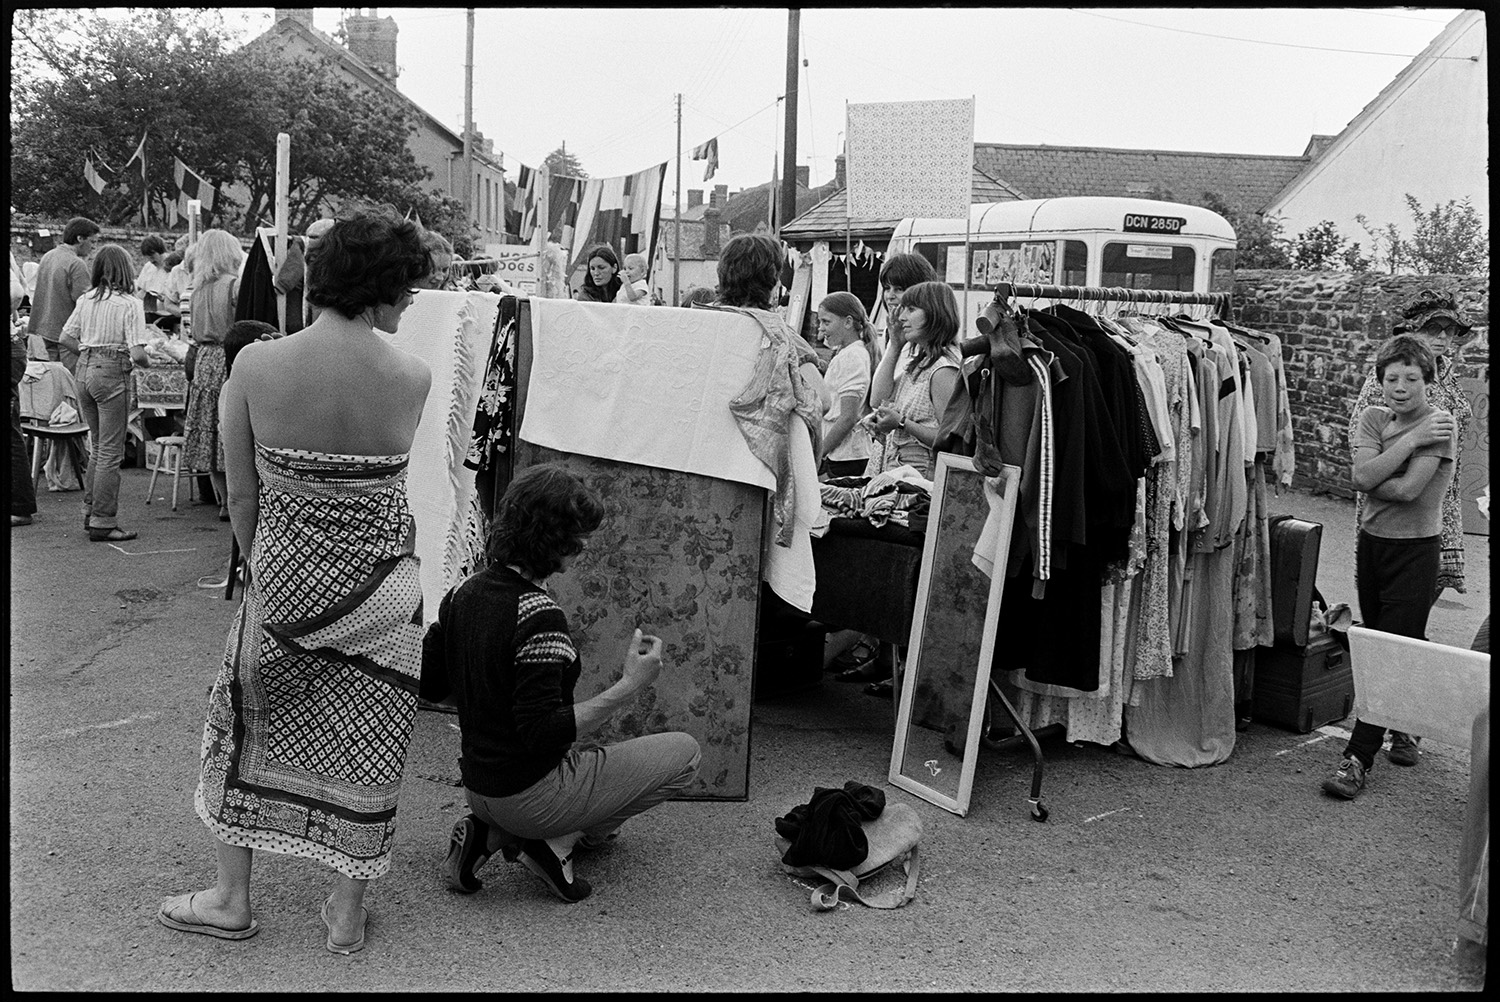 Open air market, village square part of festival, stalls, flags, crafts. 
[Two people looking at themselves in a mirror by a clothes stall at Dolton Festival or open air market. Other stalls can be seen in the background and the street is decorated with flags.]